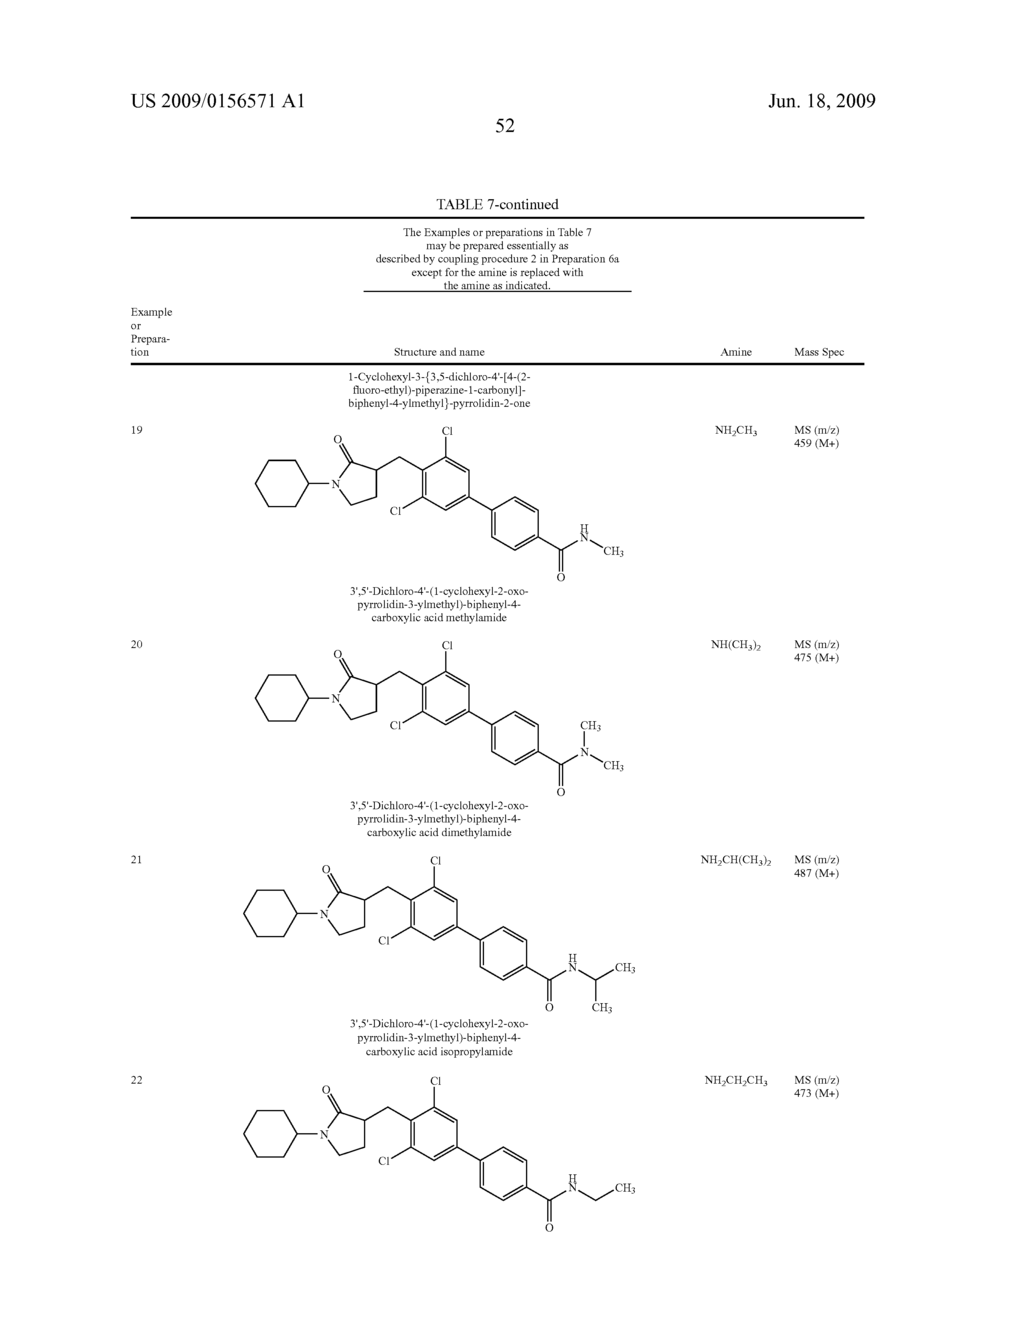 BIPHENYL AMIDE LACTAM DERIVATIVES AS INHIBITORS OF 11-BETA-HYDROXYSTEROID DEHYDROGENASE 1 - diagram, schematic, and image 53